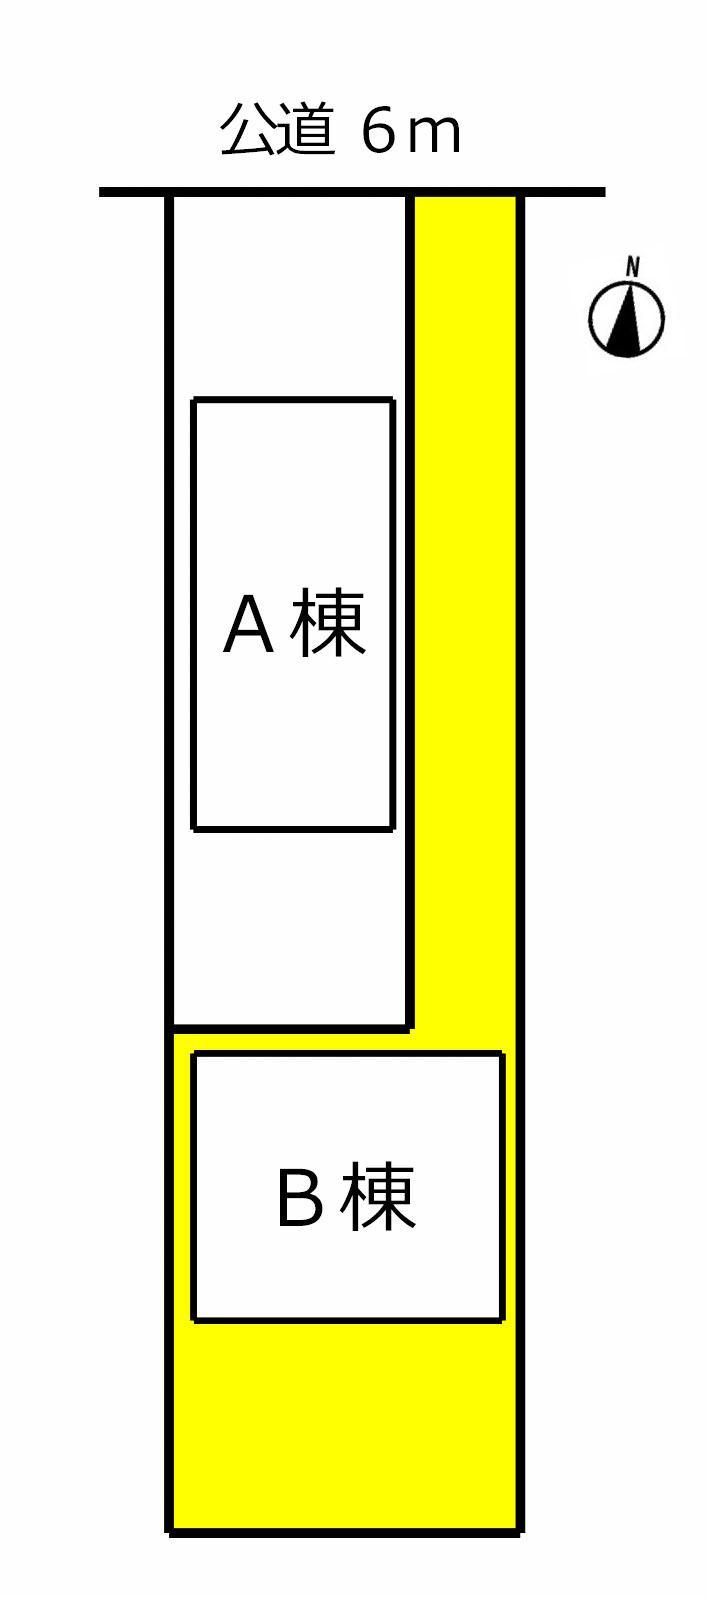 Compartment figure. The property is Building B